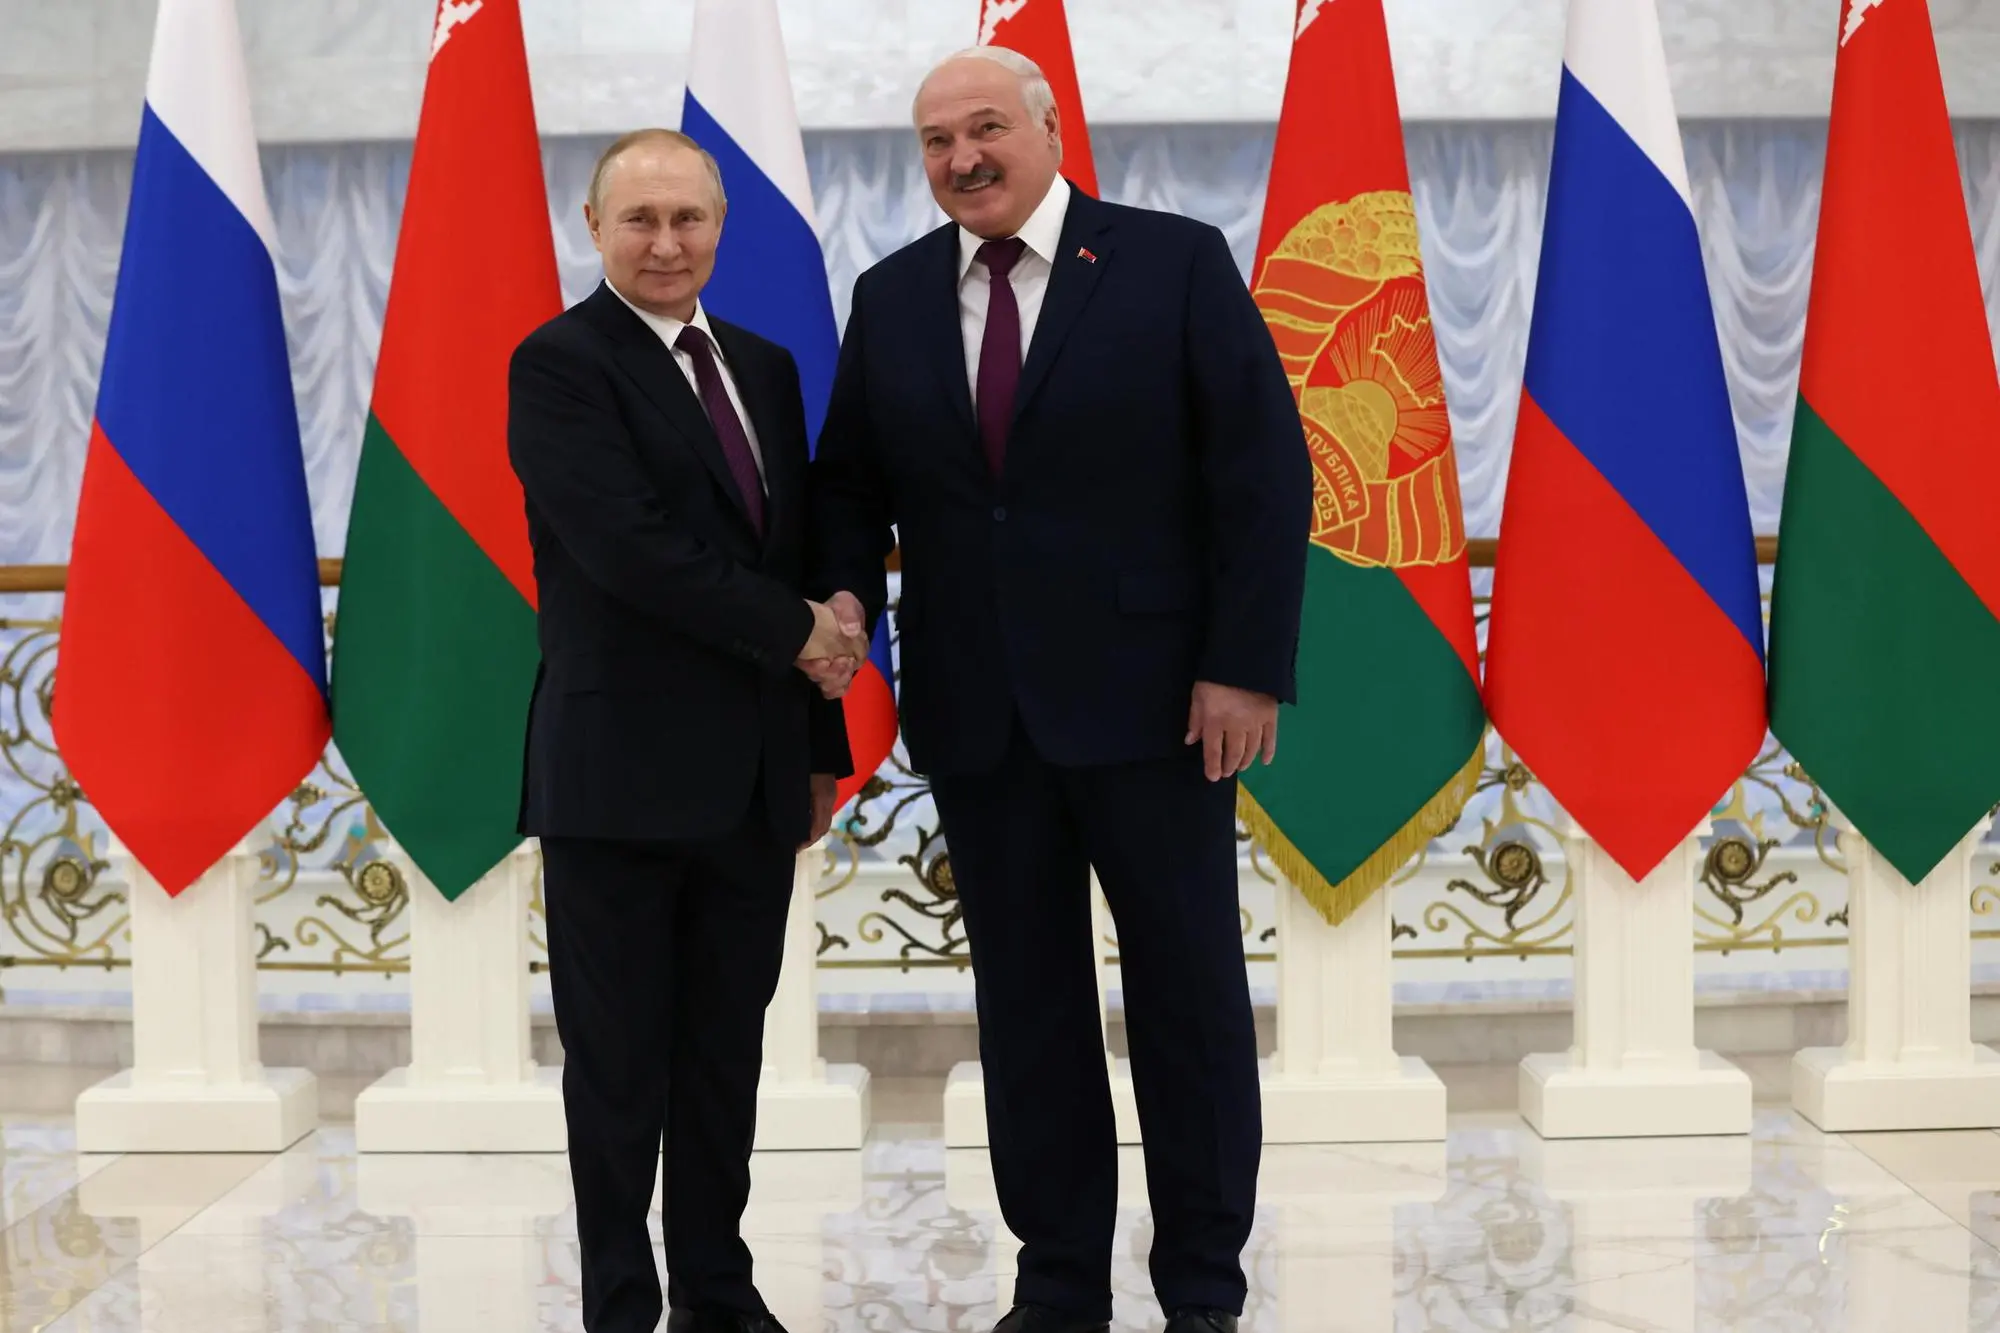 epa10373941 Russian President Vladimir Putin and Belarusian President Alexander Lukashenko shake hands before their meeting at the Palace of Independence in Minsk, Belarus, 19 December 2022. Vladimir Putin holds talks with his Belarusian counterpart and to discuss the issues of security in the region and joint measures to respond to challenges. EPA/KONSTANTIN ZAVRAZHIN/SPUTNIK/KREMLIN POOL MANDATORY CREDIT